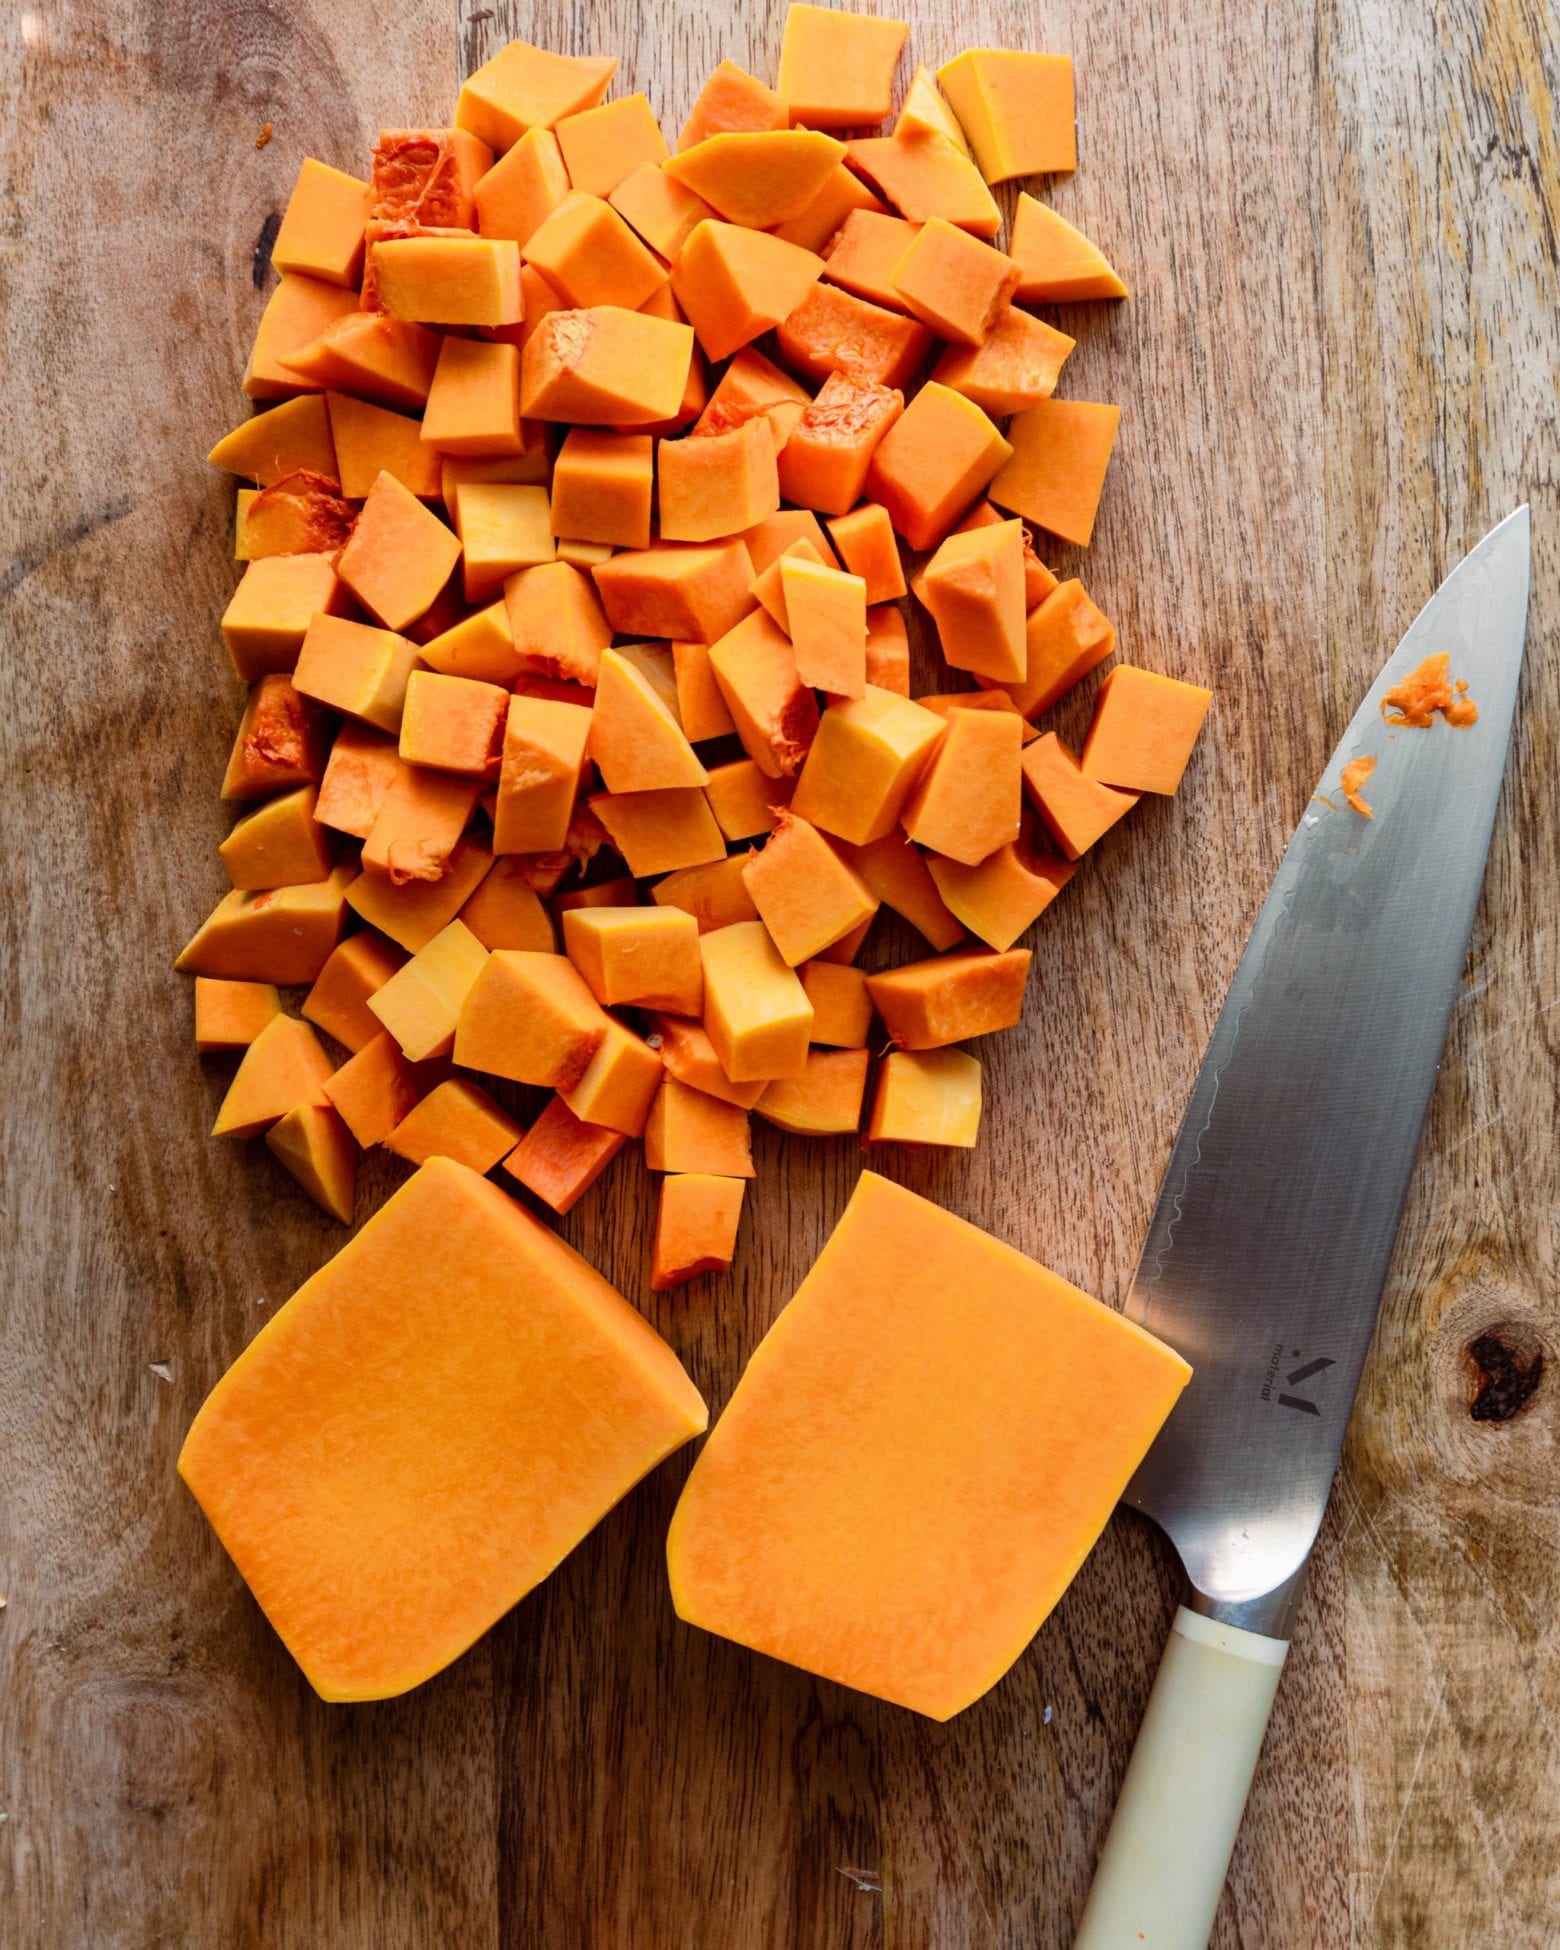 diced butternut squash with knife